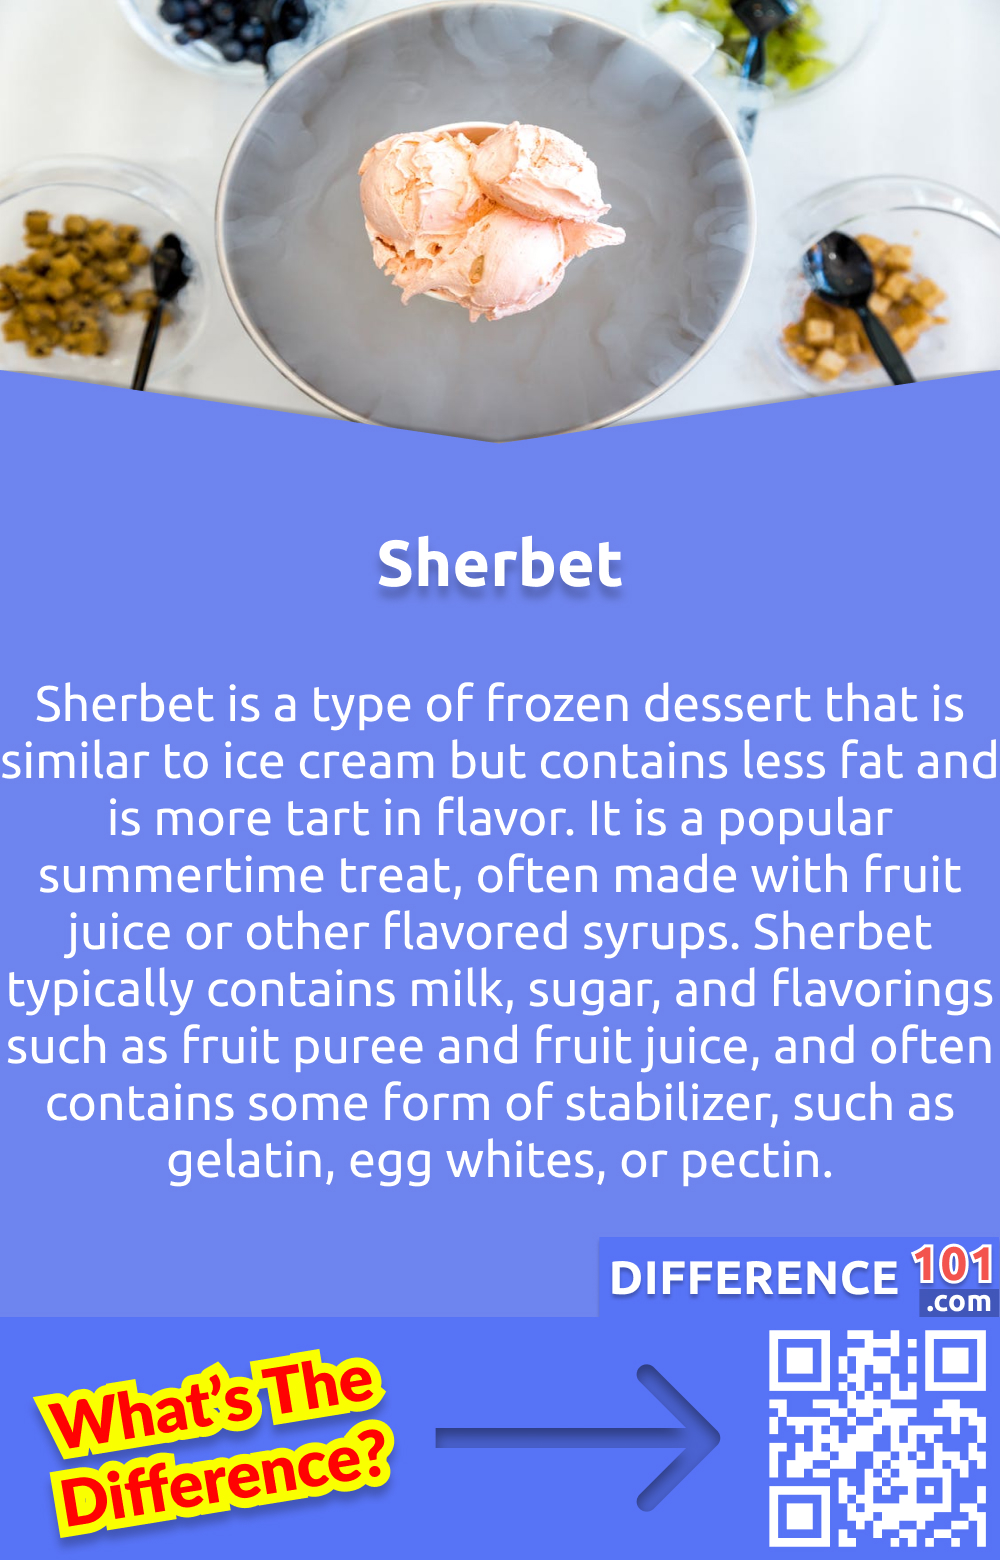 What Is Sherbet? Sherbet is a type of frozen dessert that is similar to ice cream but contains less fat and is more tart in flavor. It is a popular summertime treat, often made with fruit juice or other flavored syrups. Sherbet typically contains milk, sugar, and flavorings such as fruit puree and fruit juice, and often contains some form of stabilizer, such as gelatin, egg whites, or pectin. Sherbet is generally served in a cup or dish and is usually eaten with a spoon or straw. Sherbet is available in a range of flavors, from traditional fruit-based flavors such as lemon, raspberry, and orange to more exotic flavors such as watermelon, mango, and lime. Sherbet is also sometimes served with a topping, such as whipped cream, nuts, or sprinkles.